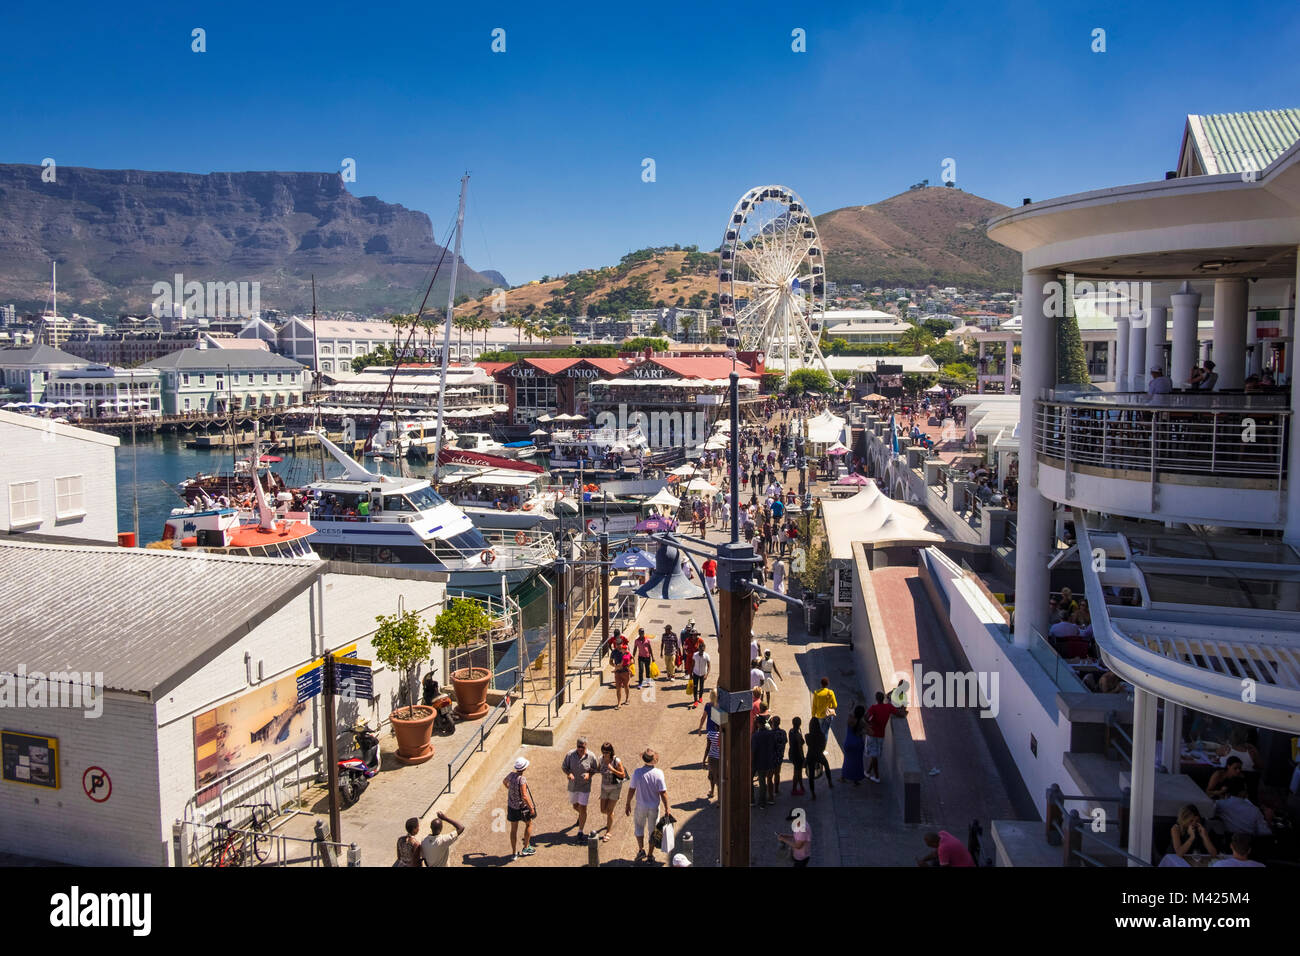 Cape Town, Tourists and shoppers at the V&A Waterfront, Cape Town, South Africa, showing Cape Union Mart, the Cape Wheel and Table Mountain Stock Photo